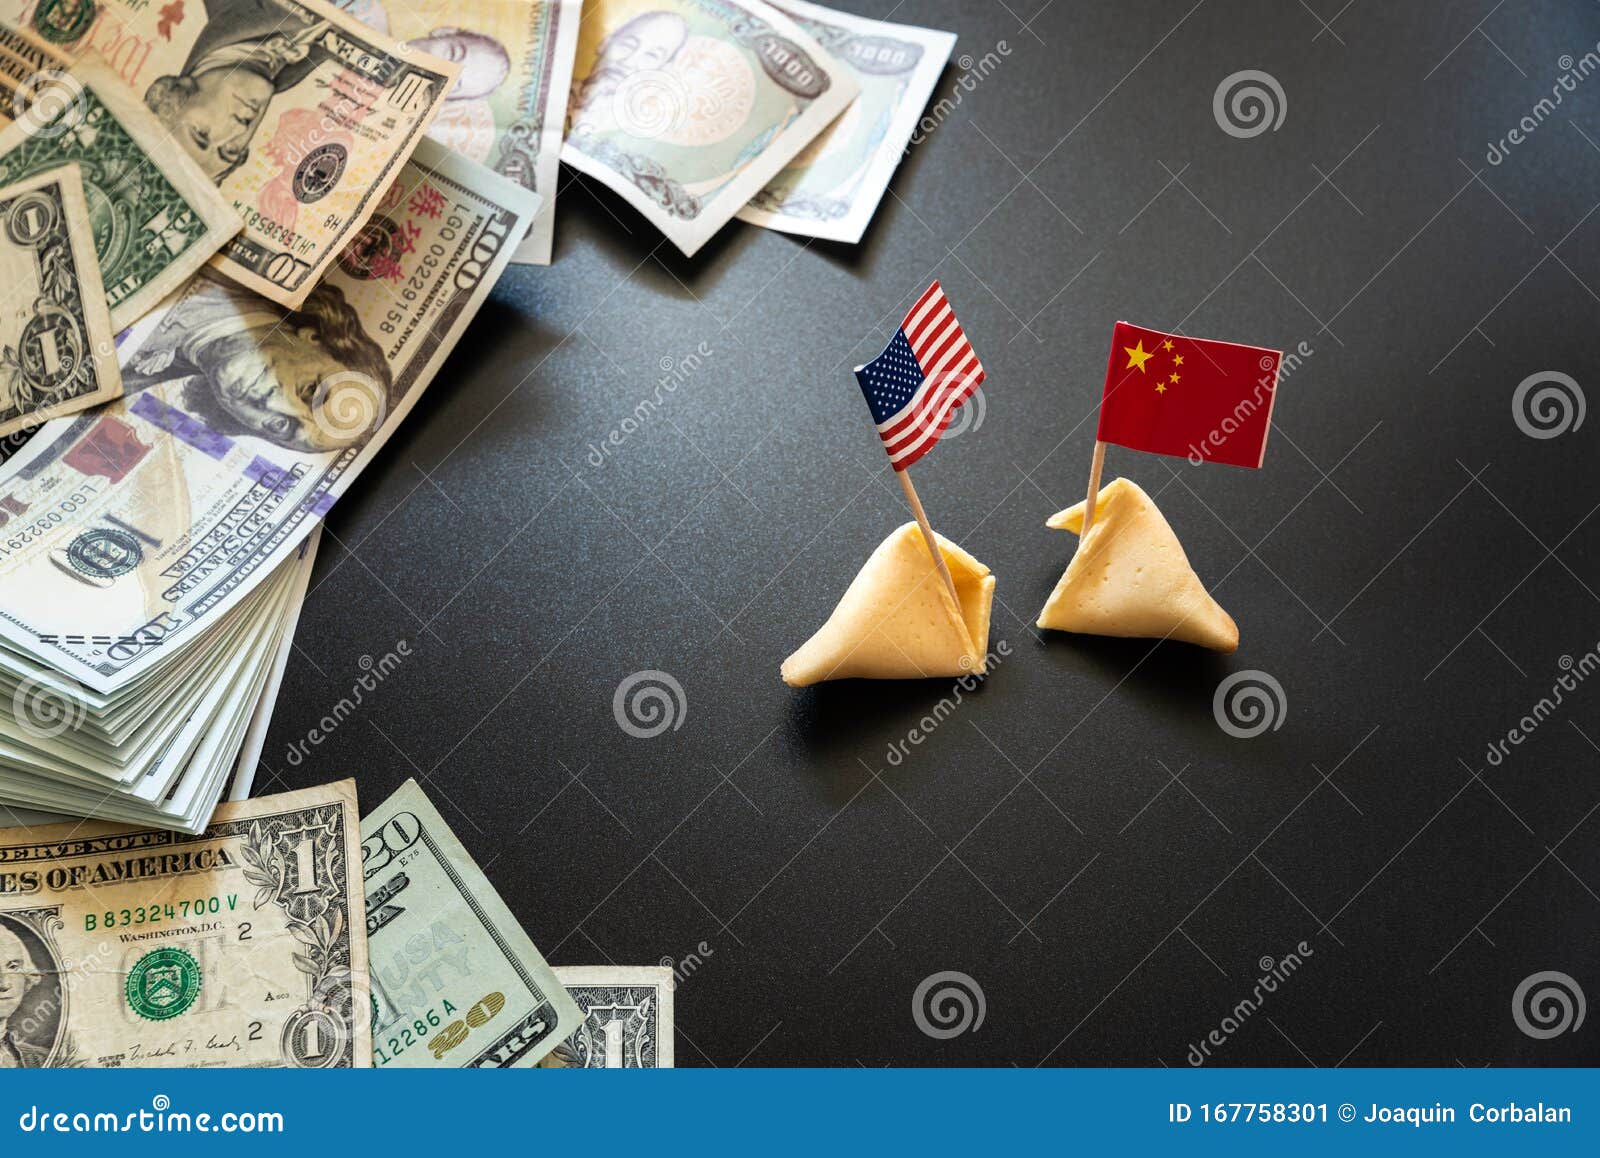 concept of commercial war between usa and china, with dollar bills and flags of the capitalist countries and biscuit